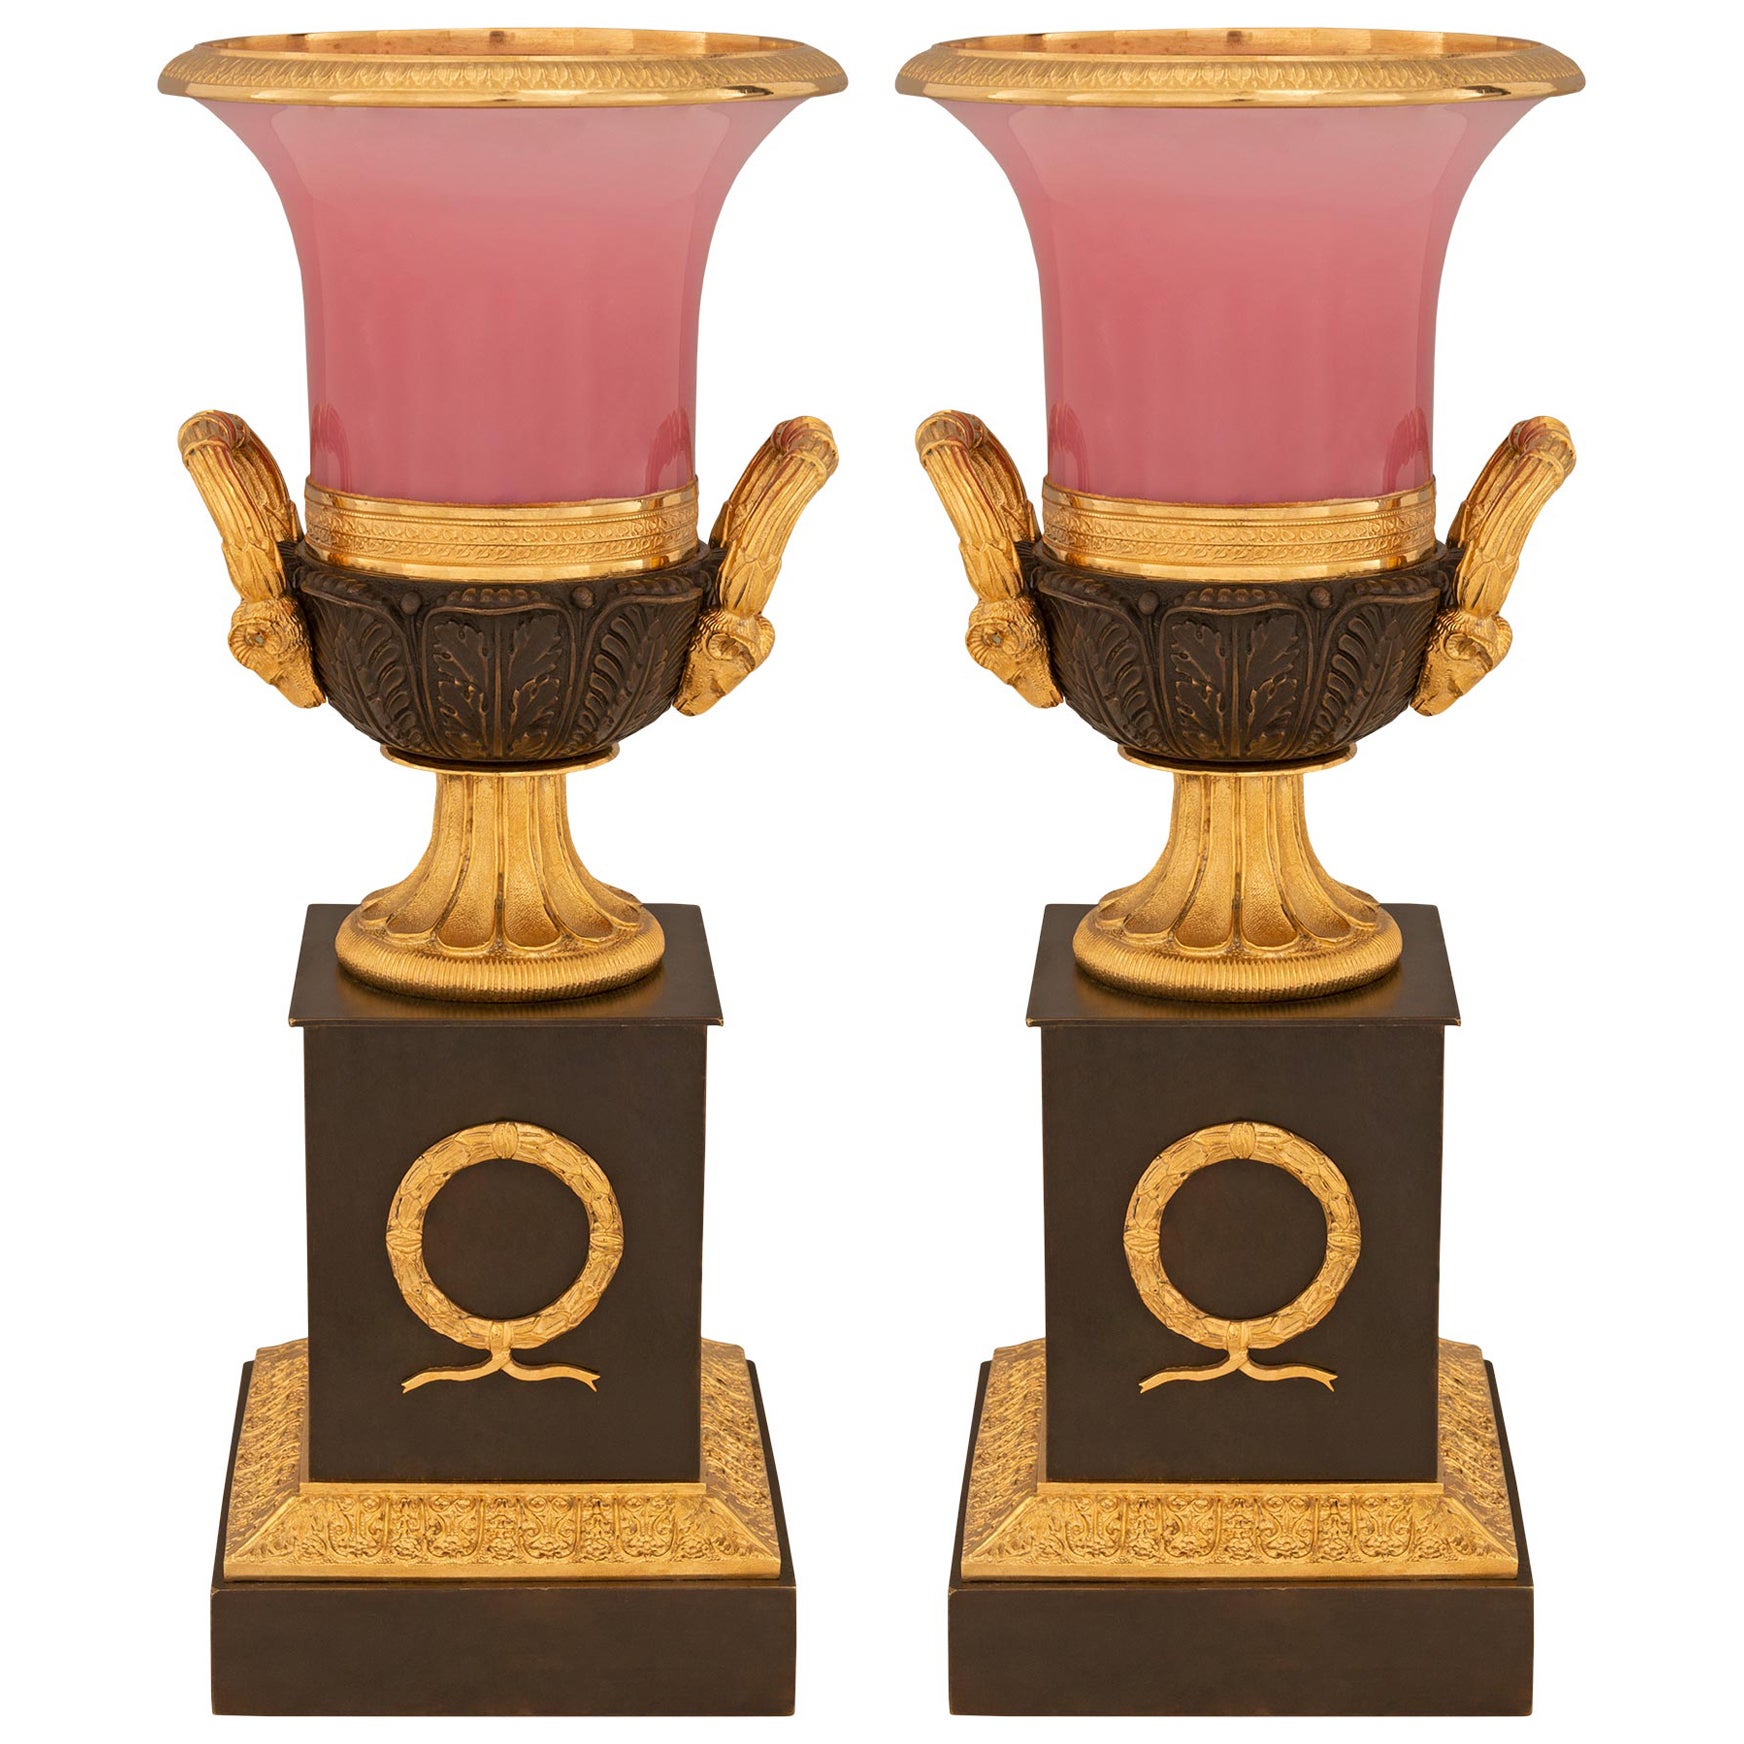 Pair of French 19th Century Neo-Classical St. Bronze, Glass, and Ormolu Urns For Sale